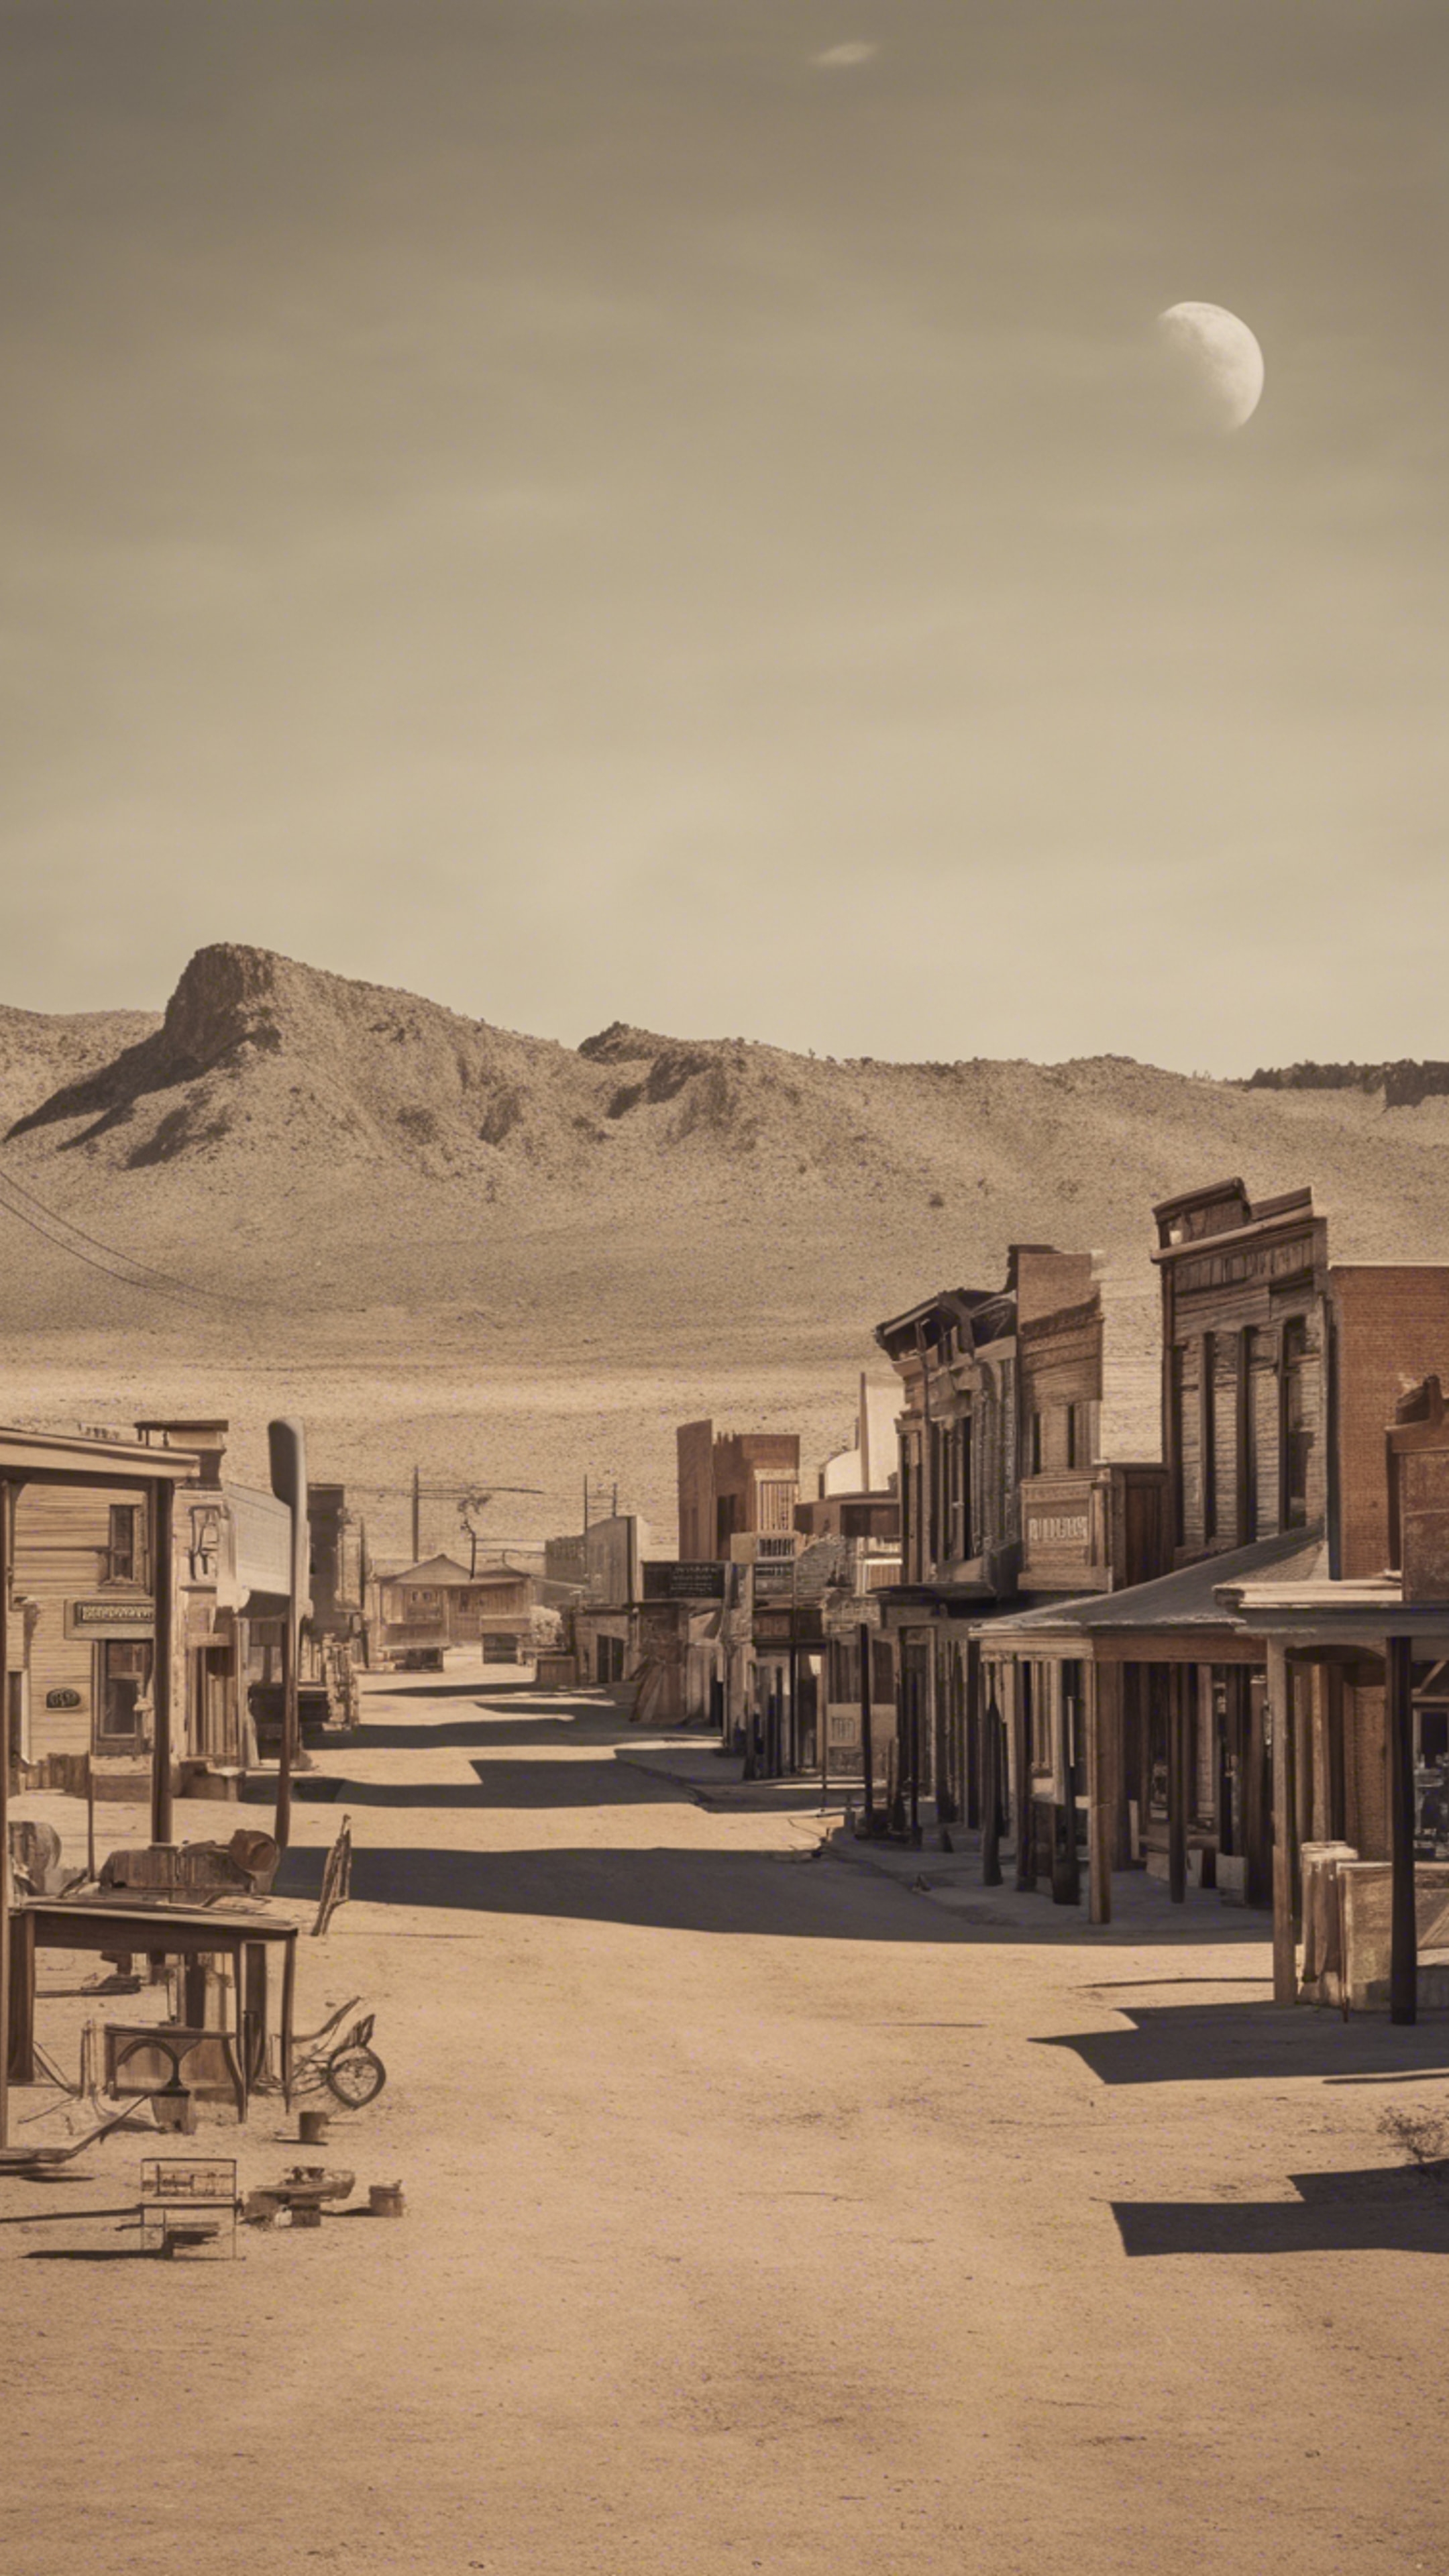 A nostalgic portrayal of a deserted old western town skyline at high noon. Тапет[6f3773f399464a7985e4]